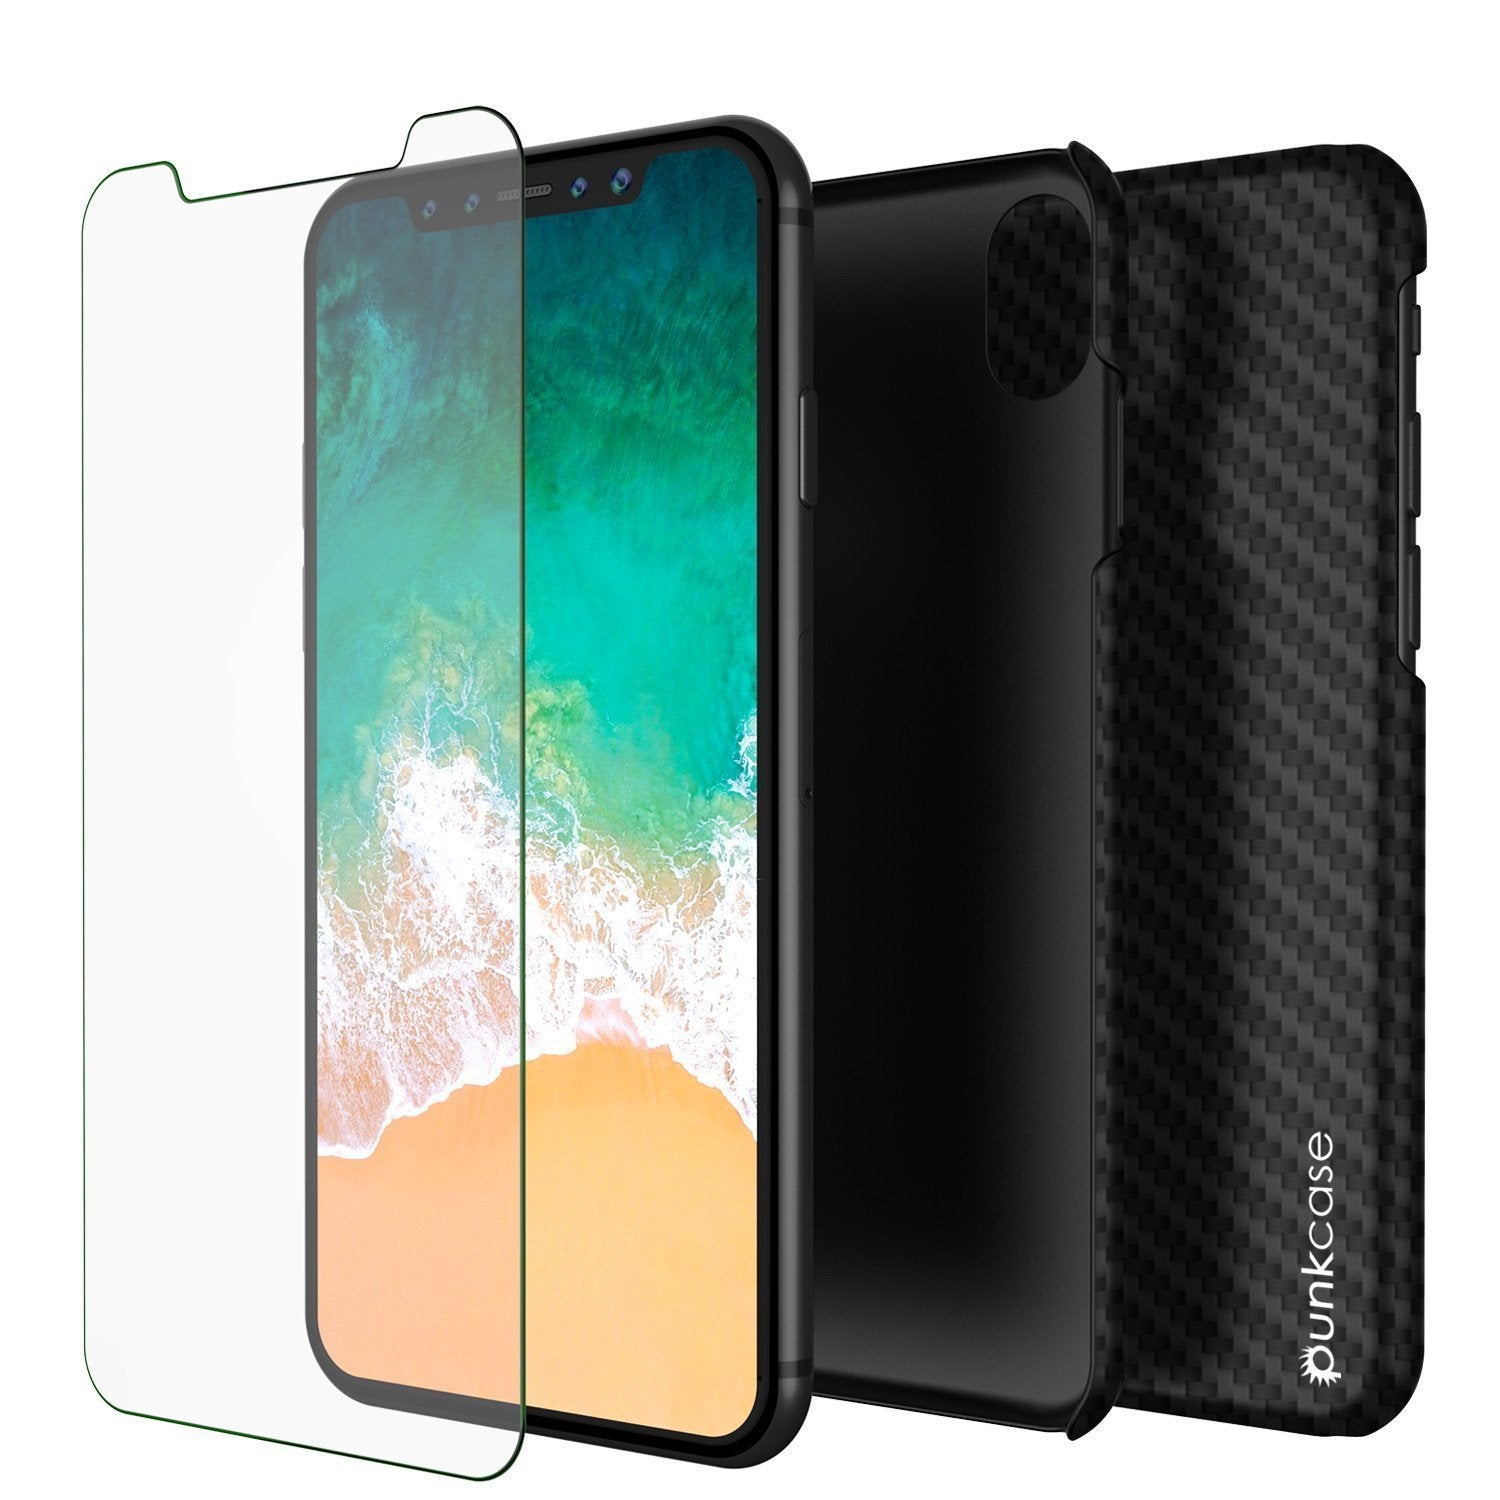 iPhone X case CarbonShield, Ultra Thin 2 Piece Dual Layer [Jet black]